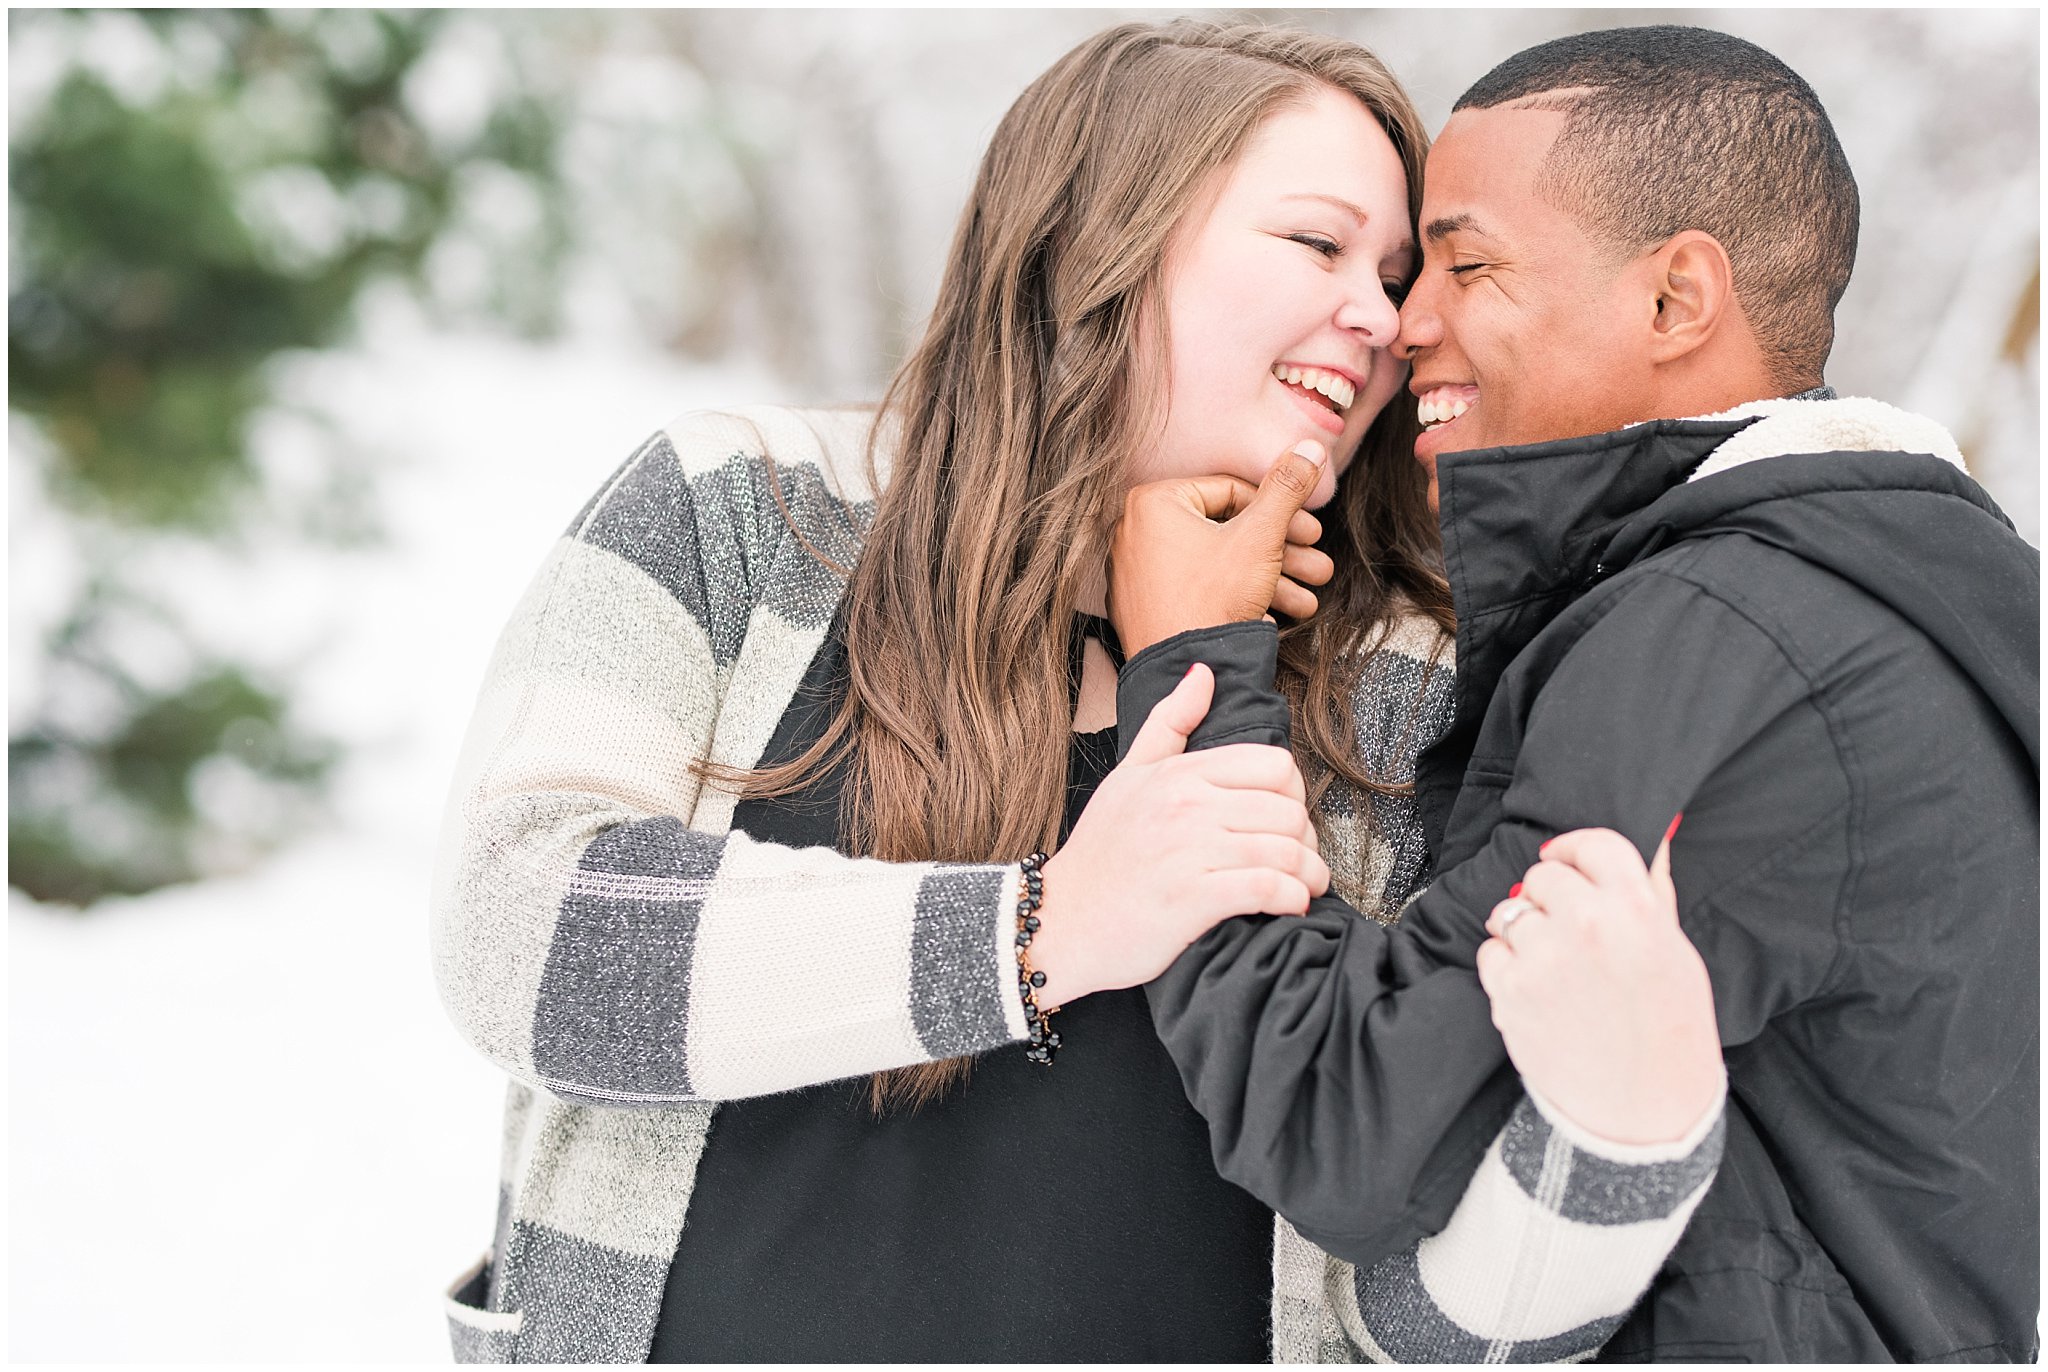 Engagement photos with a couple in the snowy winter Utah mountains with pine trees | Mueller Park and Downtown Winter Engagement Session | Jessie and Dallin Photography